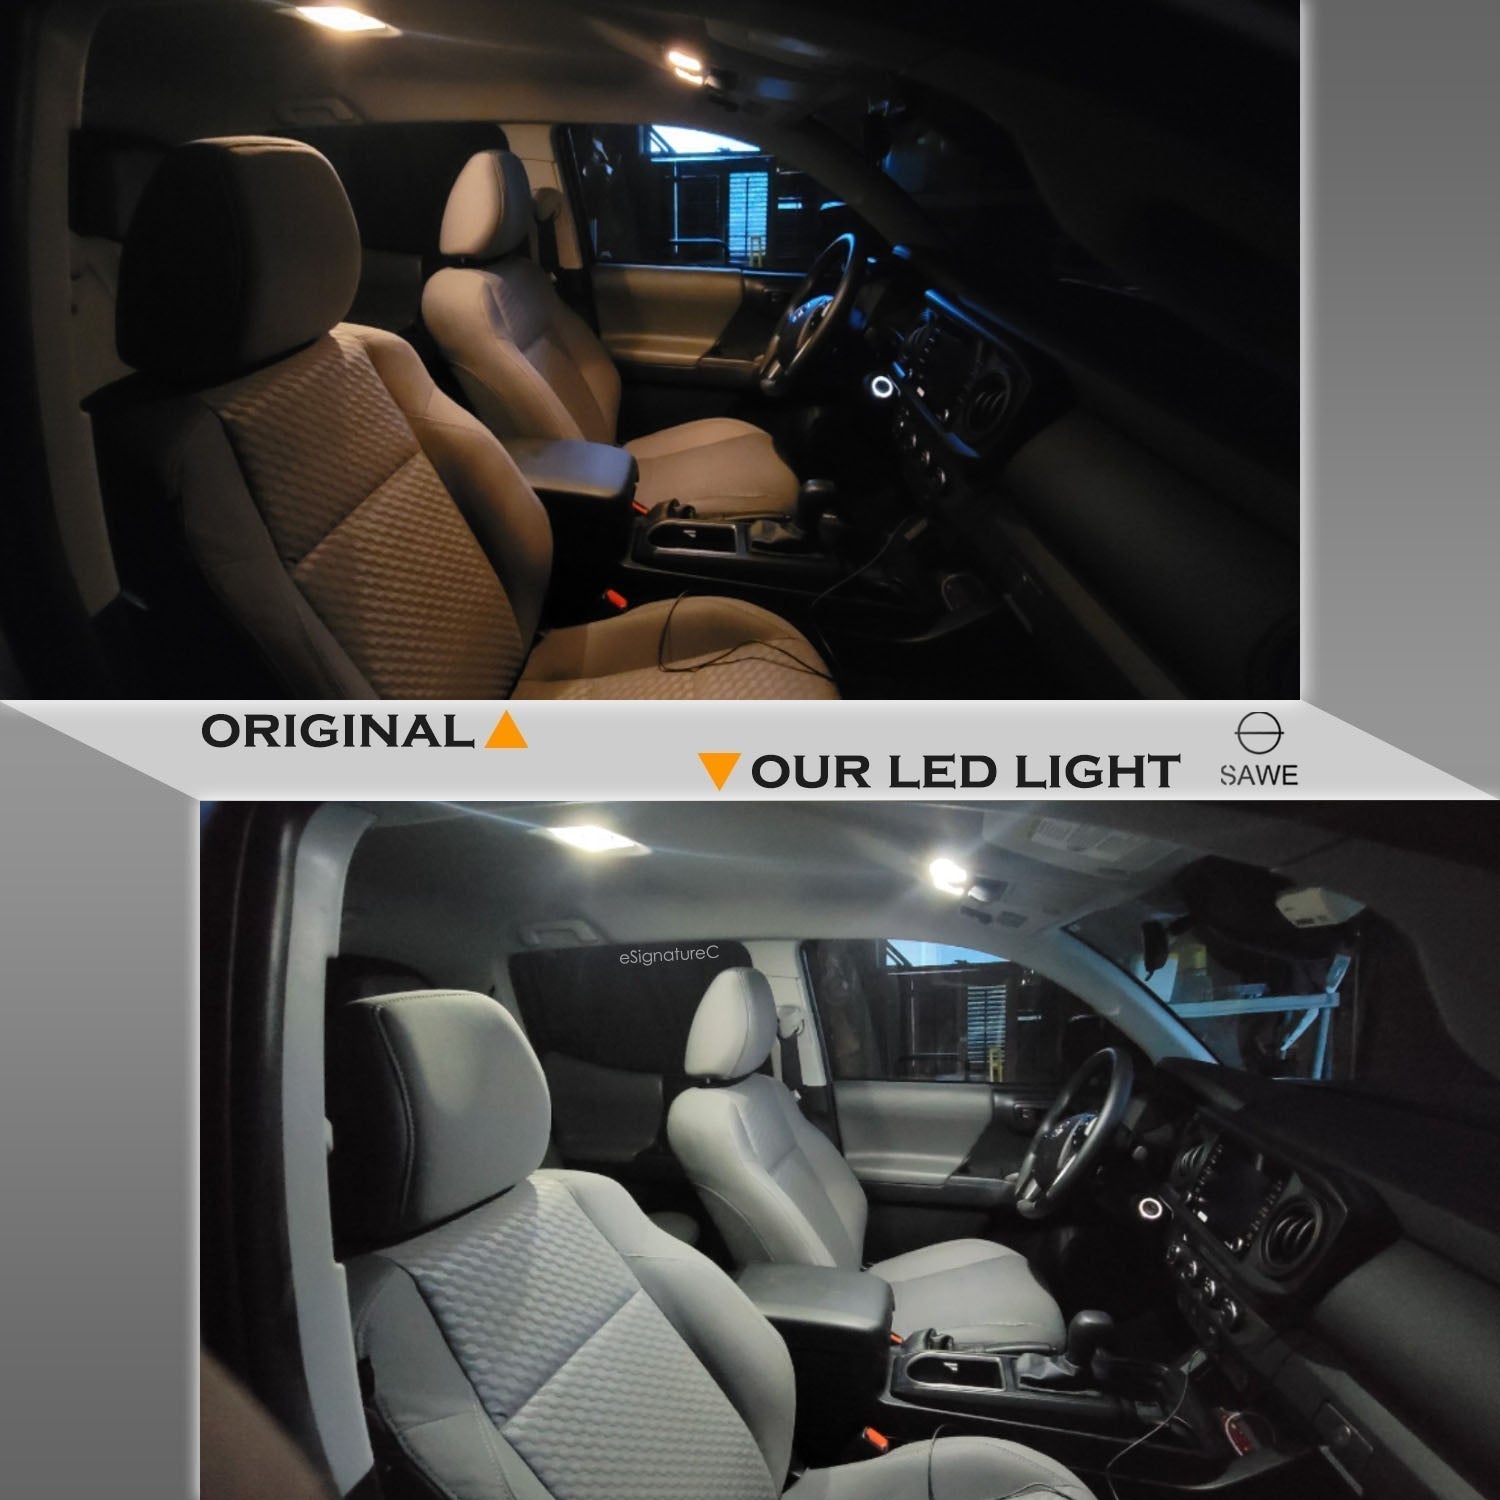 For Audi A6 S6 Interior LED Lights - Dome & Map Light Bulb Package Kit for 2005 - 2011 - White